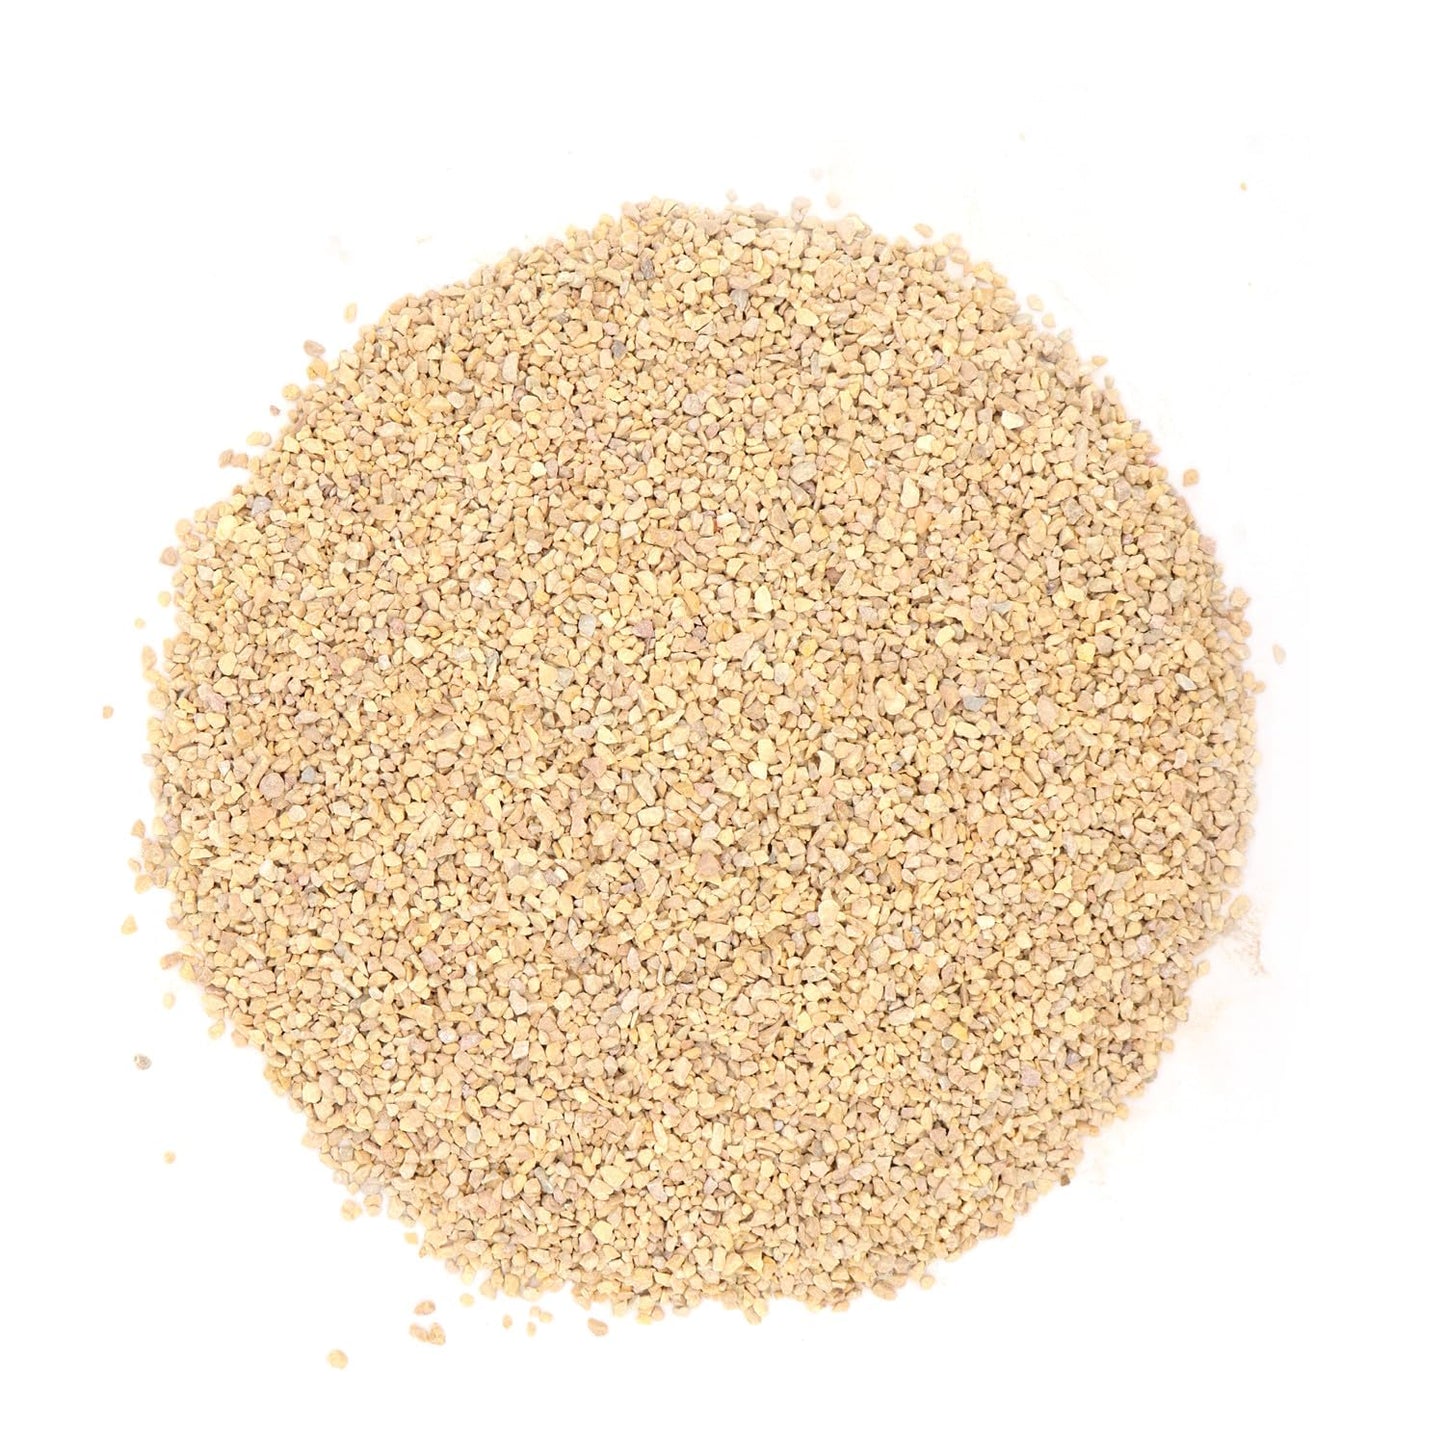 Premium Pebbles Coarse Sand. Light Brown Color. 1/8 Inch 2 lbs. for Potting Soil, Succulents, Pots, Plants, Gardening, Indoor, Crafting, Vase Fillers (X-Mini, COARSE Sand - Light Brown, 2)